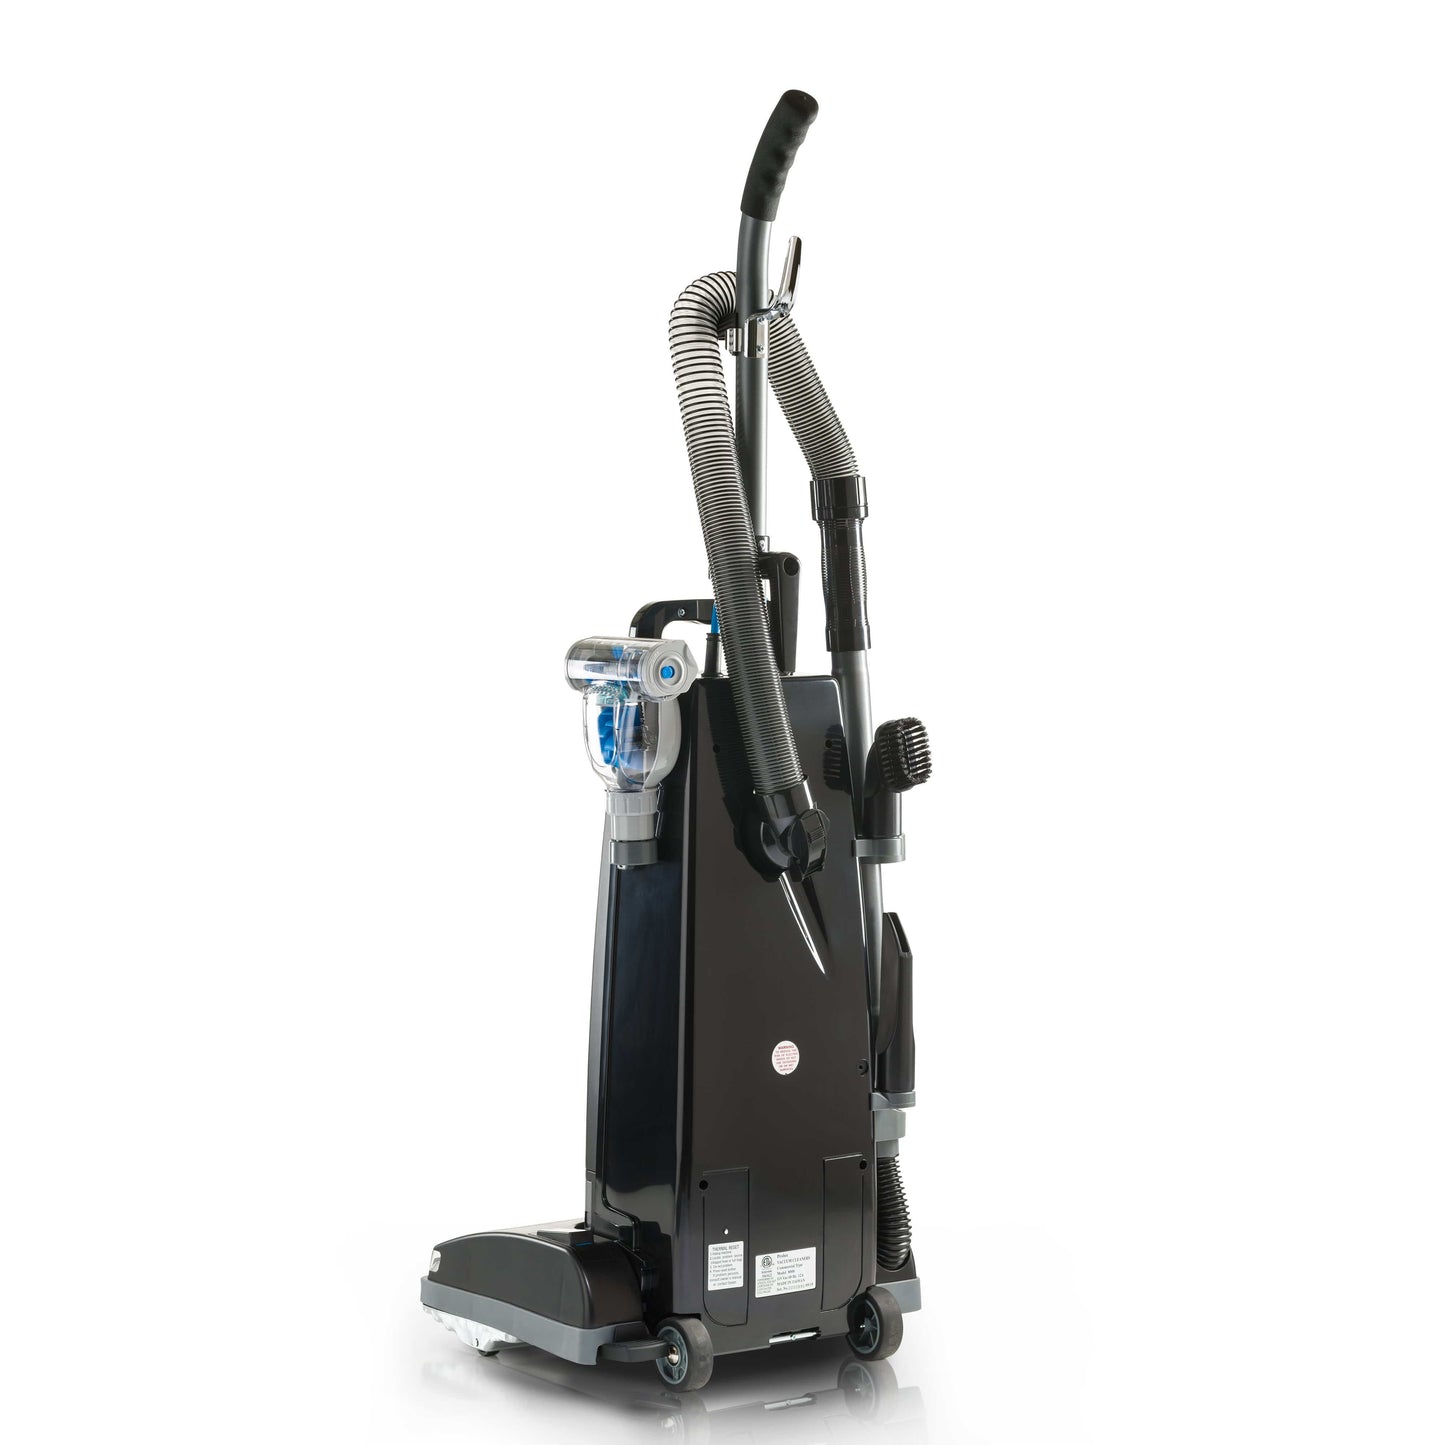 Demo Model Prolux 8000 Commercial Upright Vacuum with Sealed HEPA Filtration